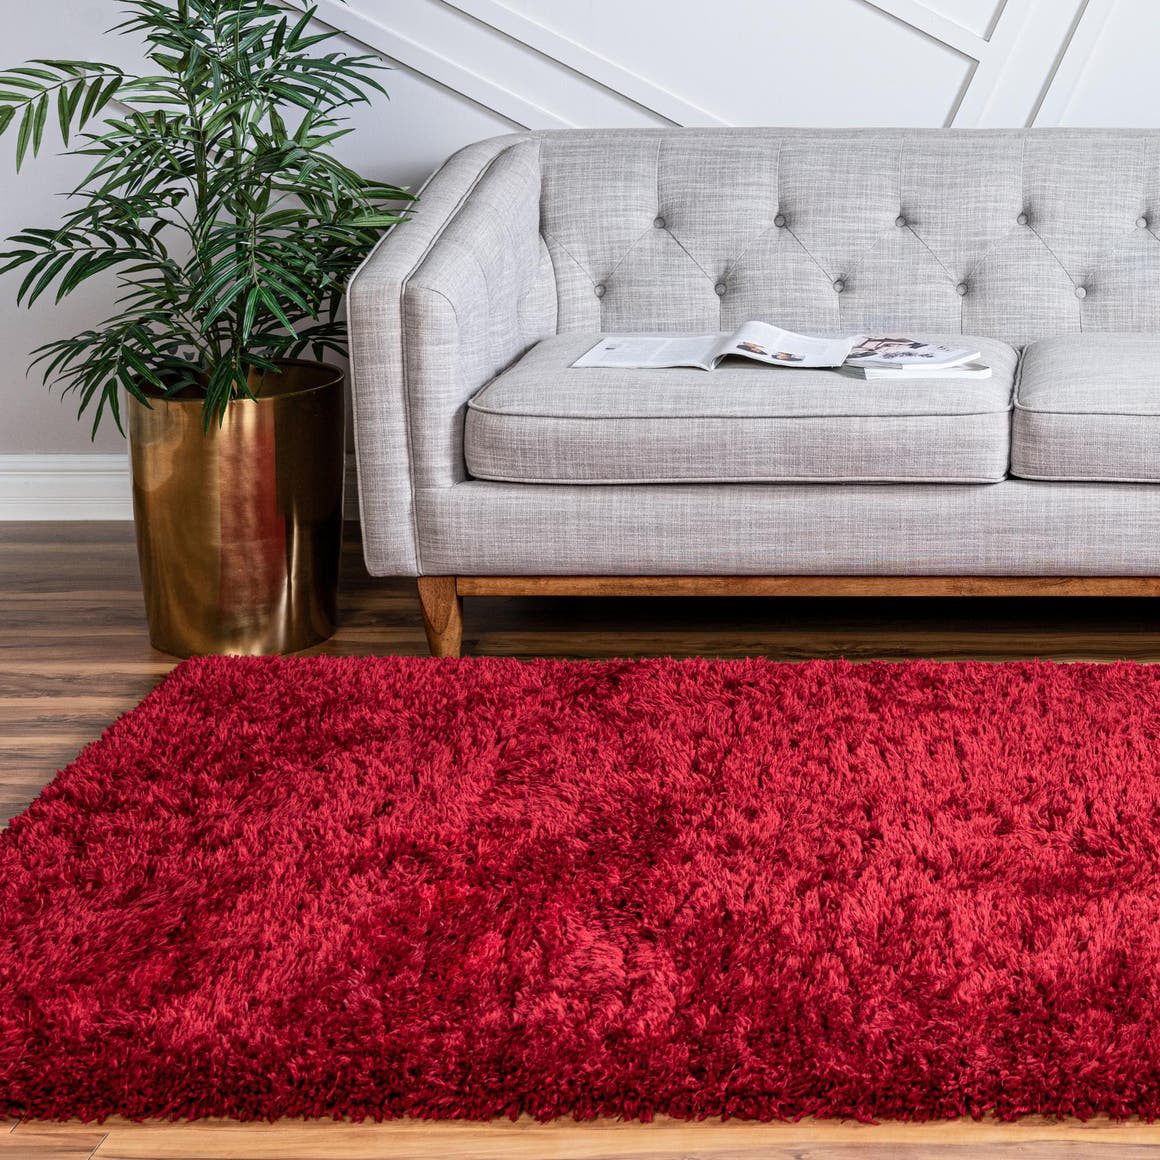 Infinity Collection Solid Shag Area Rugrugs ‚Äì Merlot 10' X 13'  High Pile Plush Shag Rug Perfect For Living Rooms, Bedrooms, Dining Rooms  And More – Walmart In Red Solid Shag Rugs (View 14 of 15)